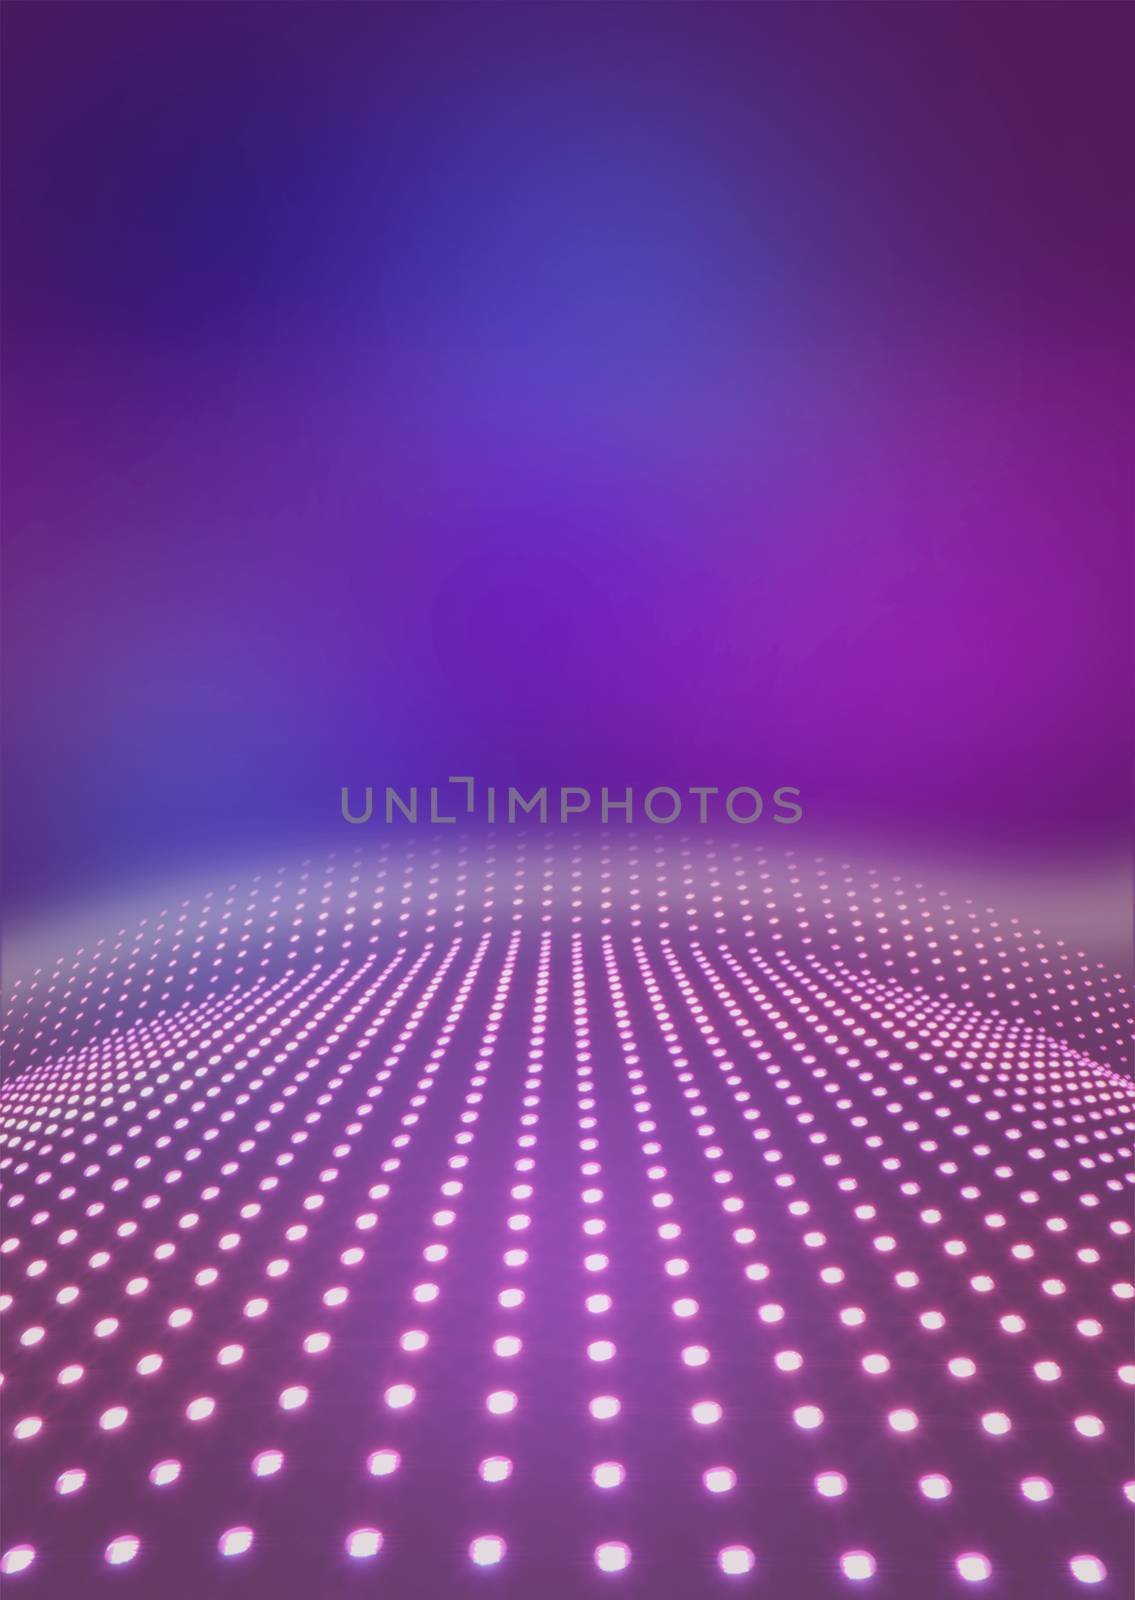 Light path to infinity on a pink by Guru3D